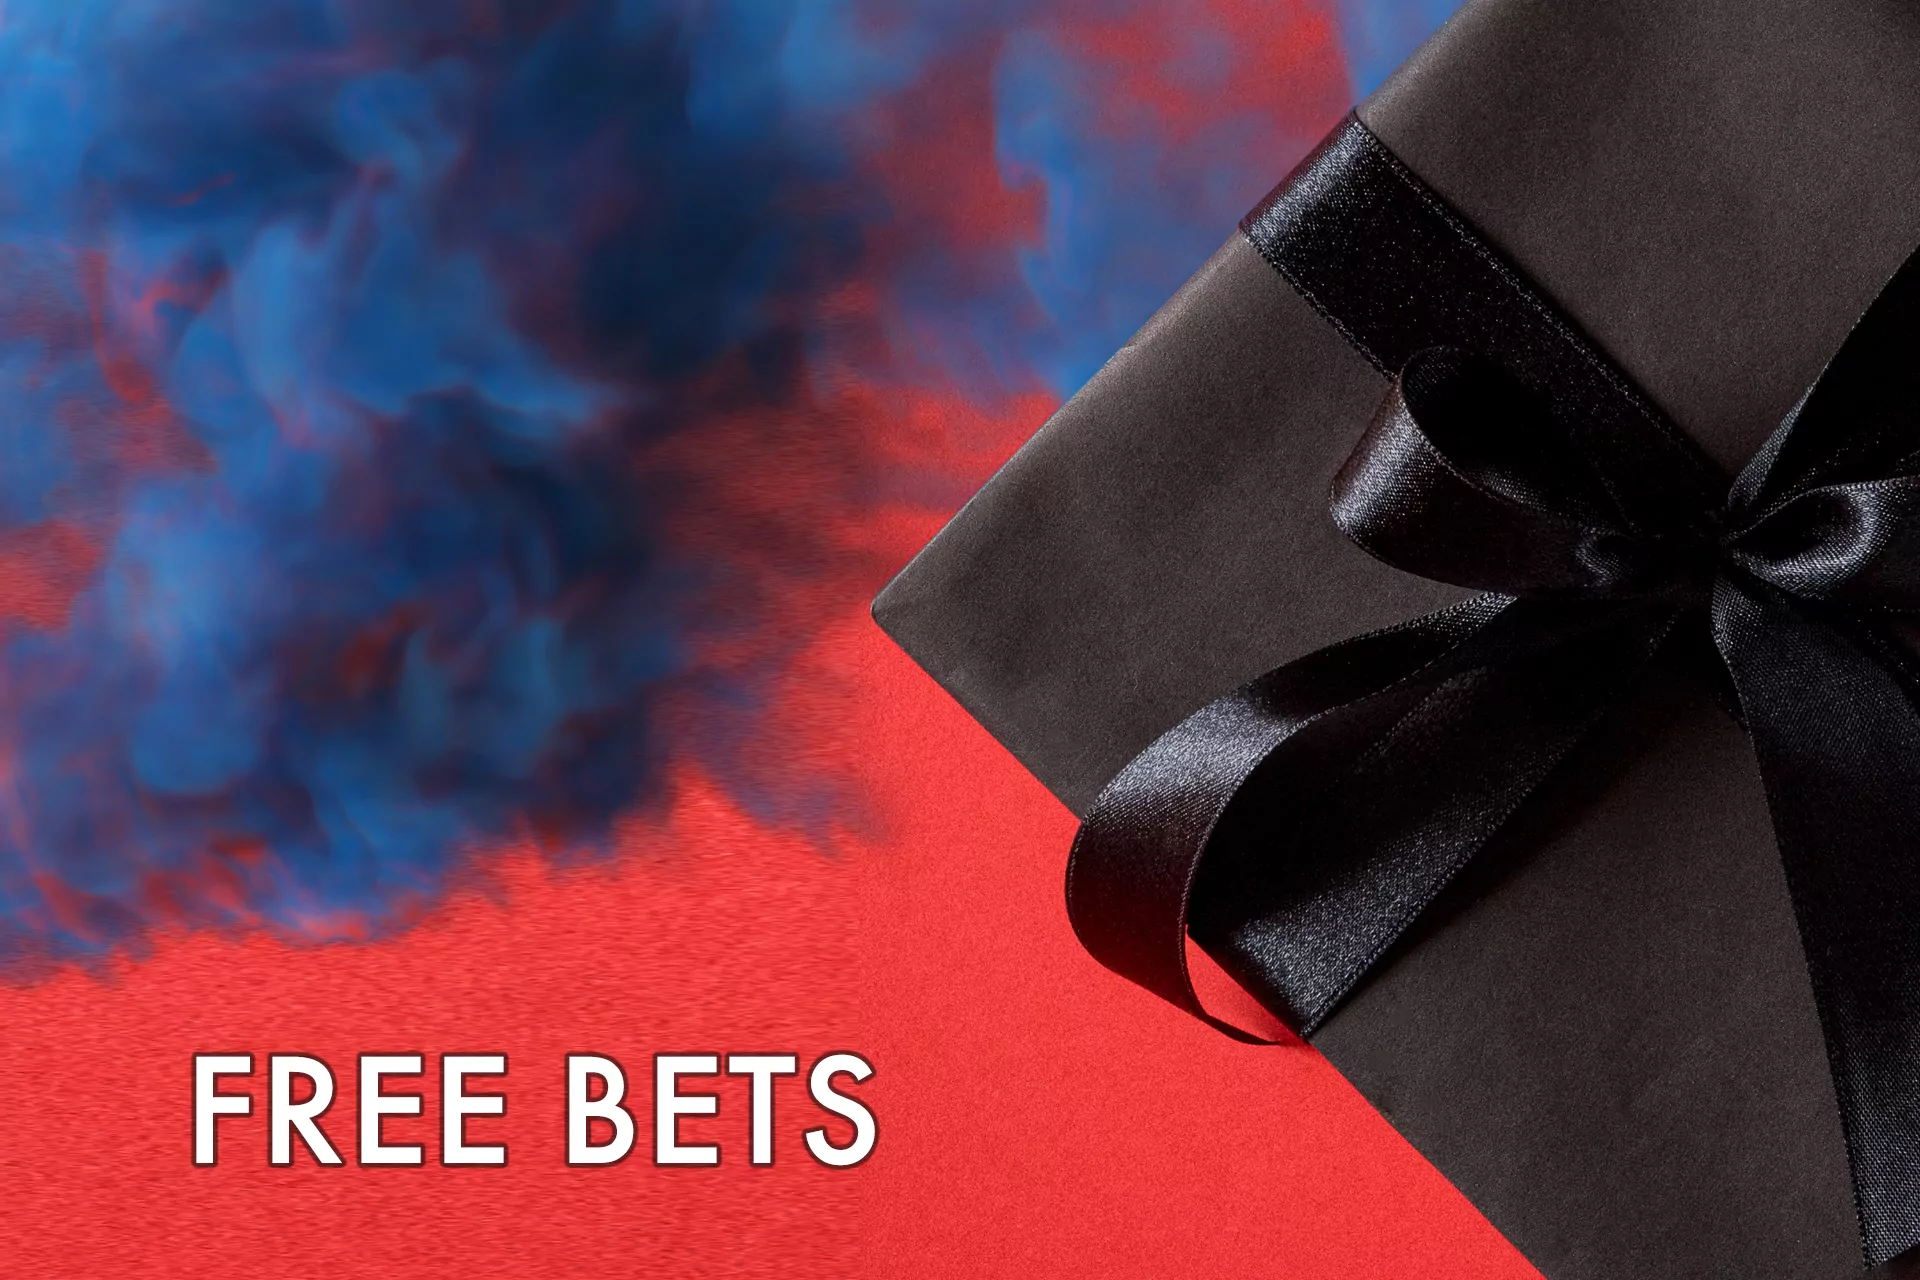 If you receive free bets, you'll be allowed to place some bets without spending really money.